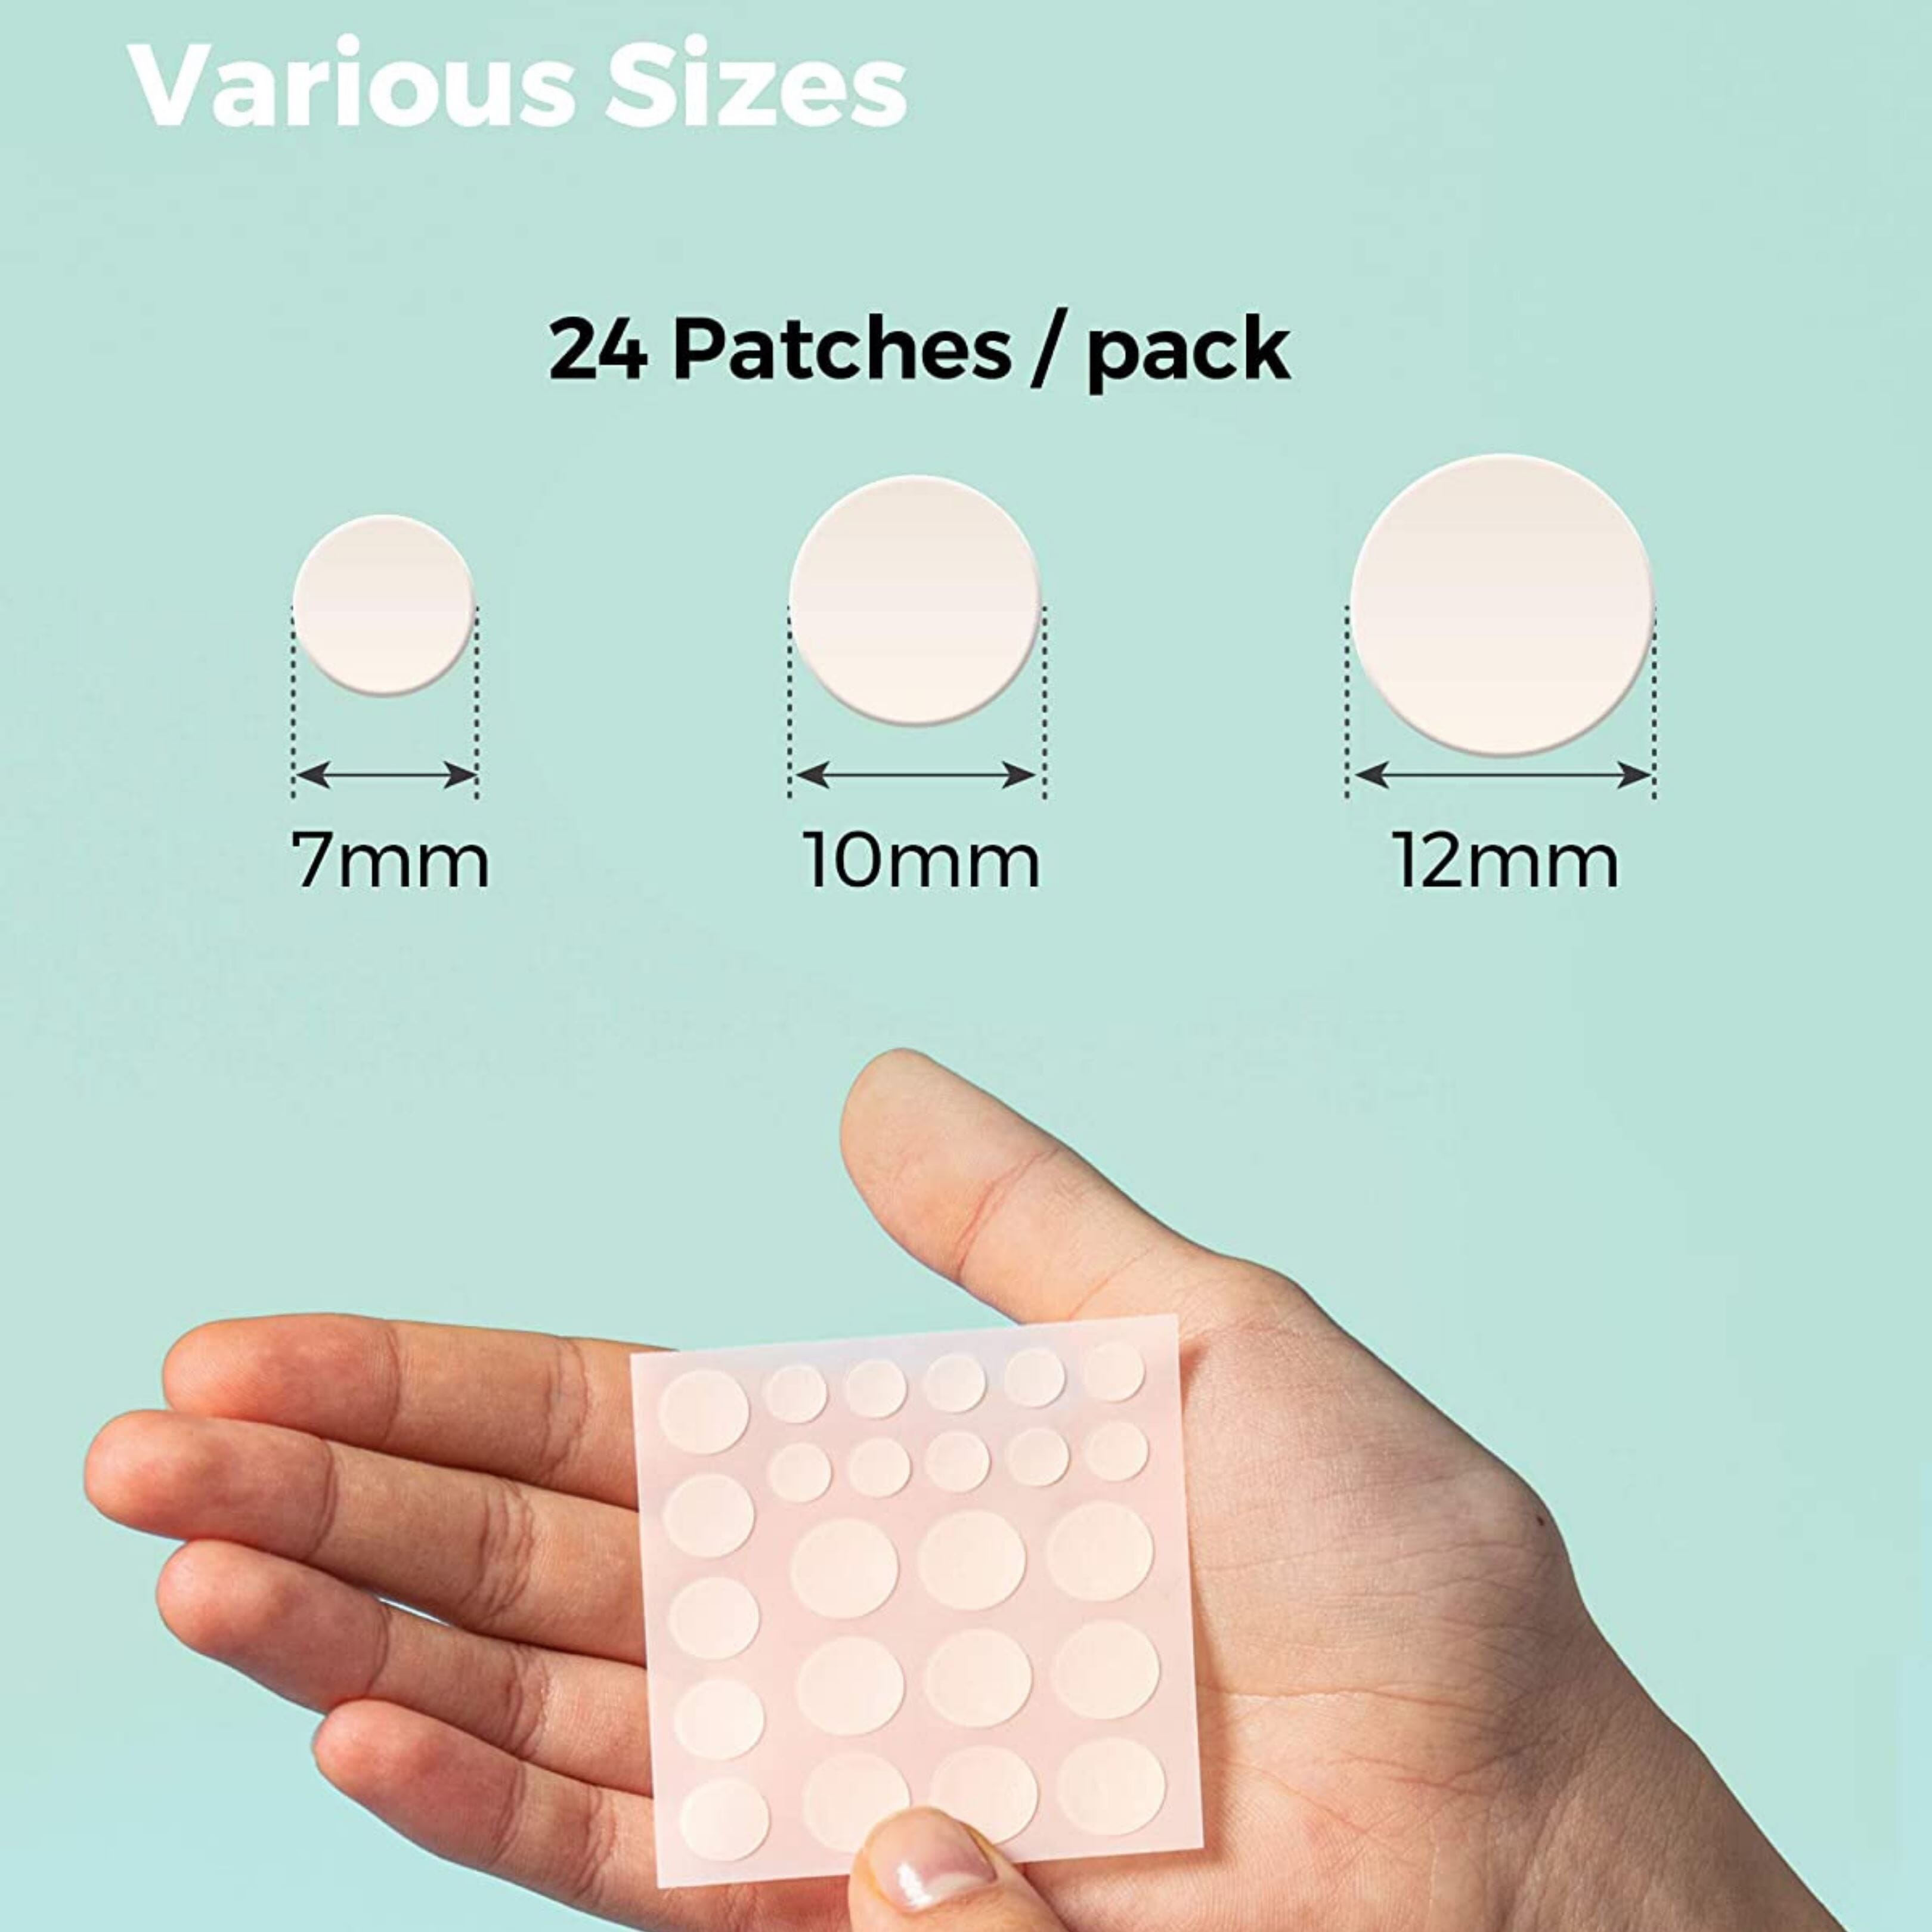 COSRX Acne Pimple Master 72 patches (3 Packs of 24 Patches) Skin Care COSRX ORION XO Sri Lanka